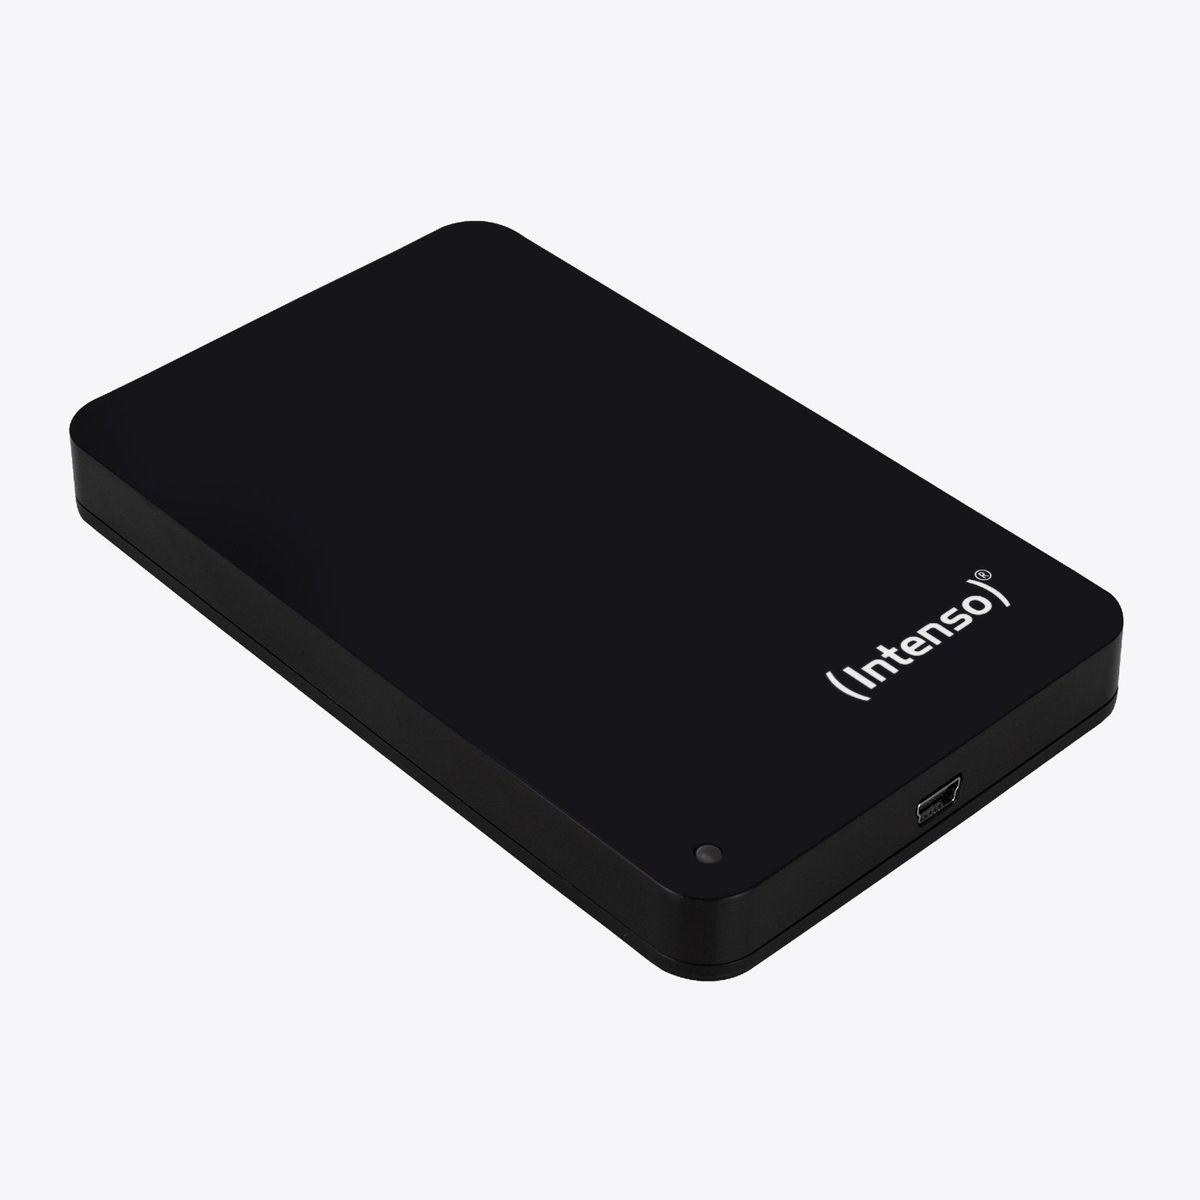 Intenso 1To disque dur externe Memory Case (USB 3.0, 2,5